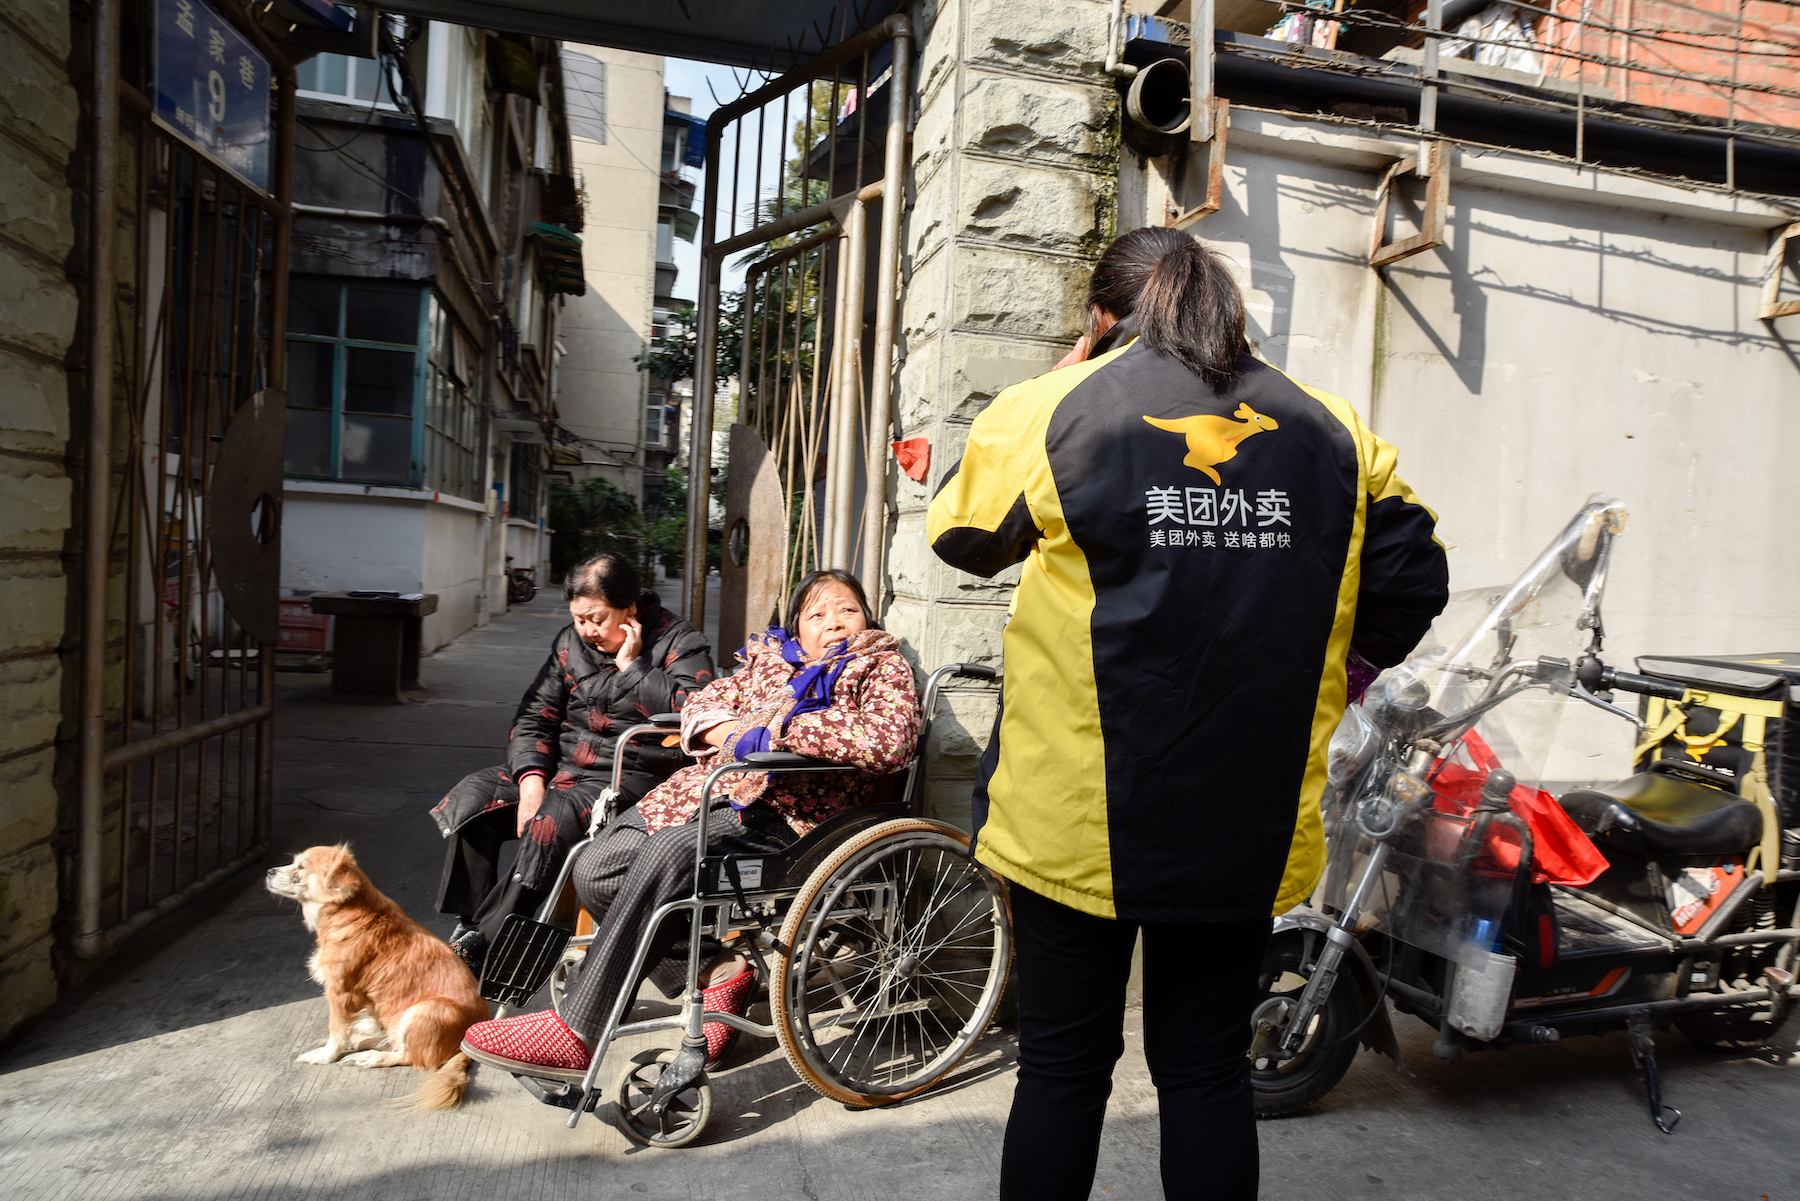 A female Meituan food delivery rider delivers food to elderly residents